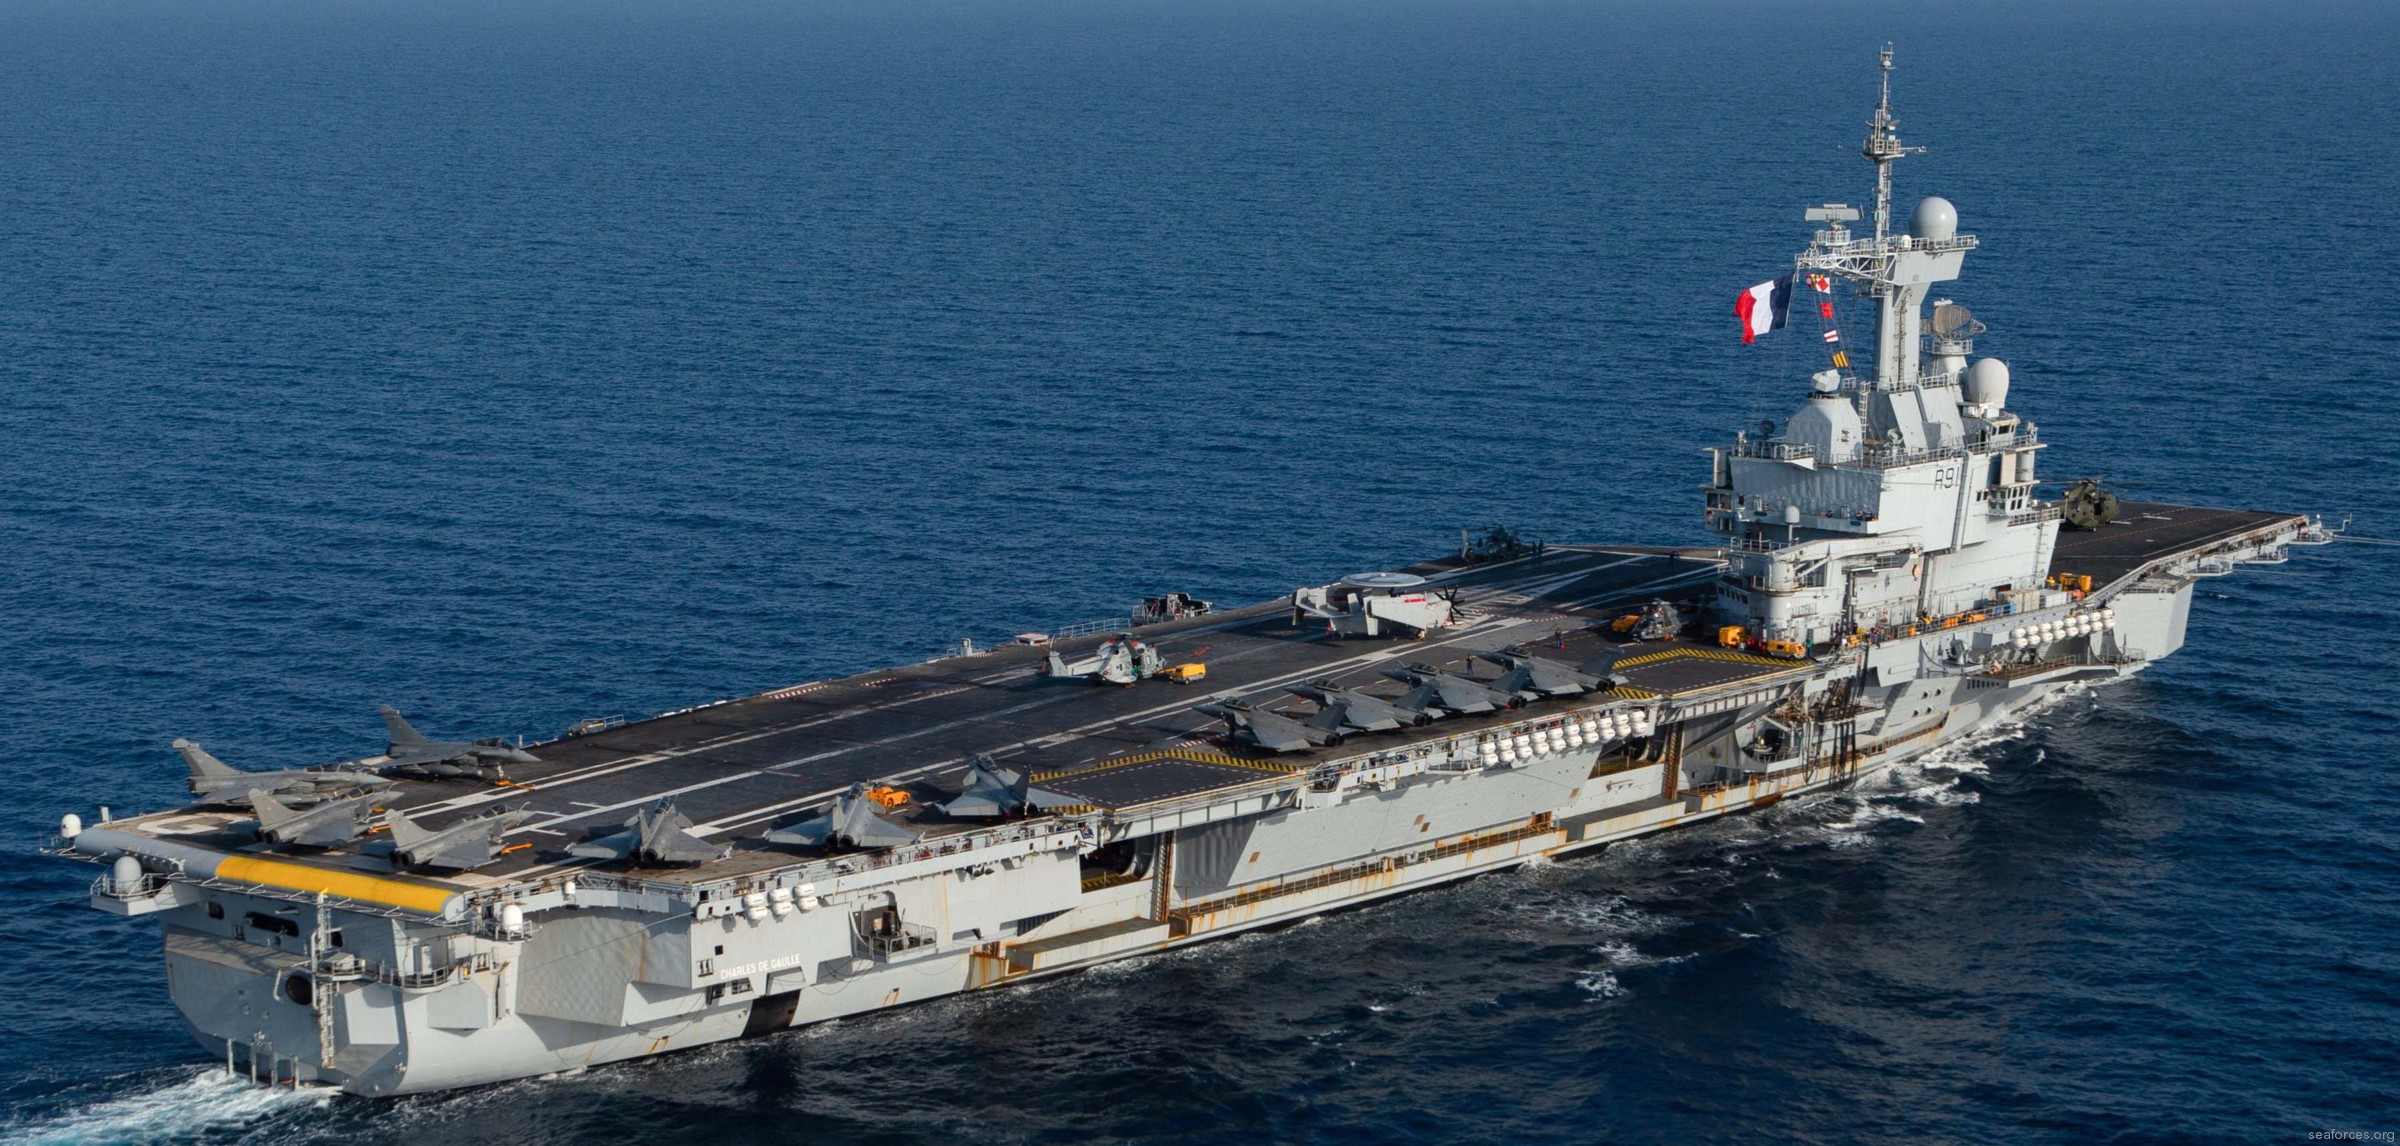 r-91 fs charles de gaulle aircraft carrier french navy 51